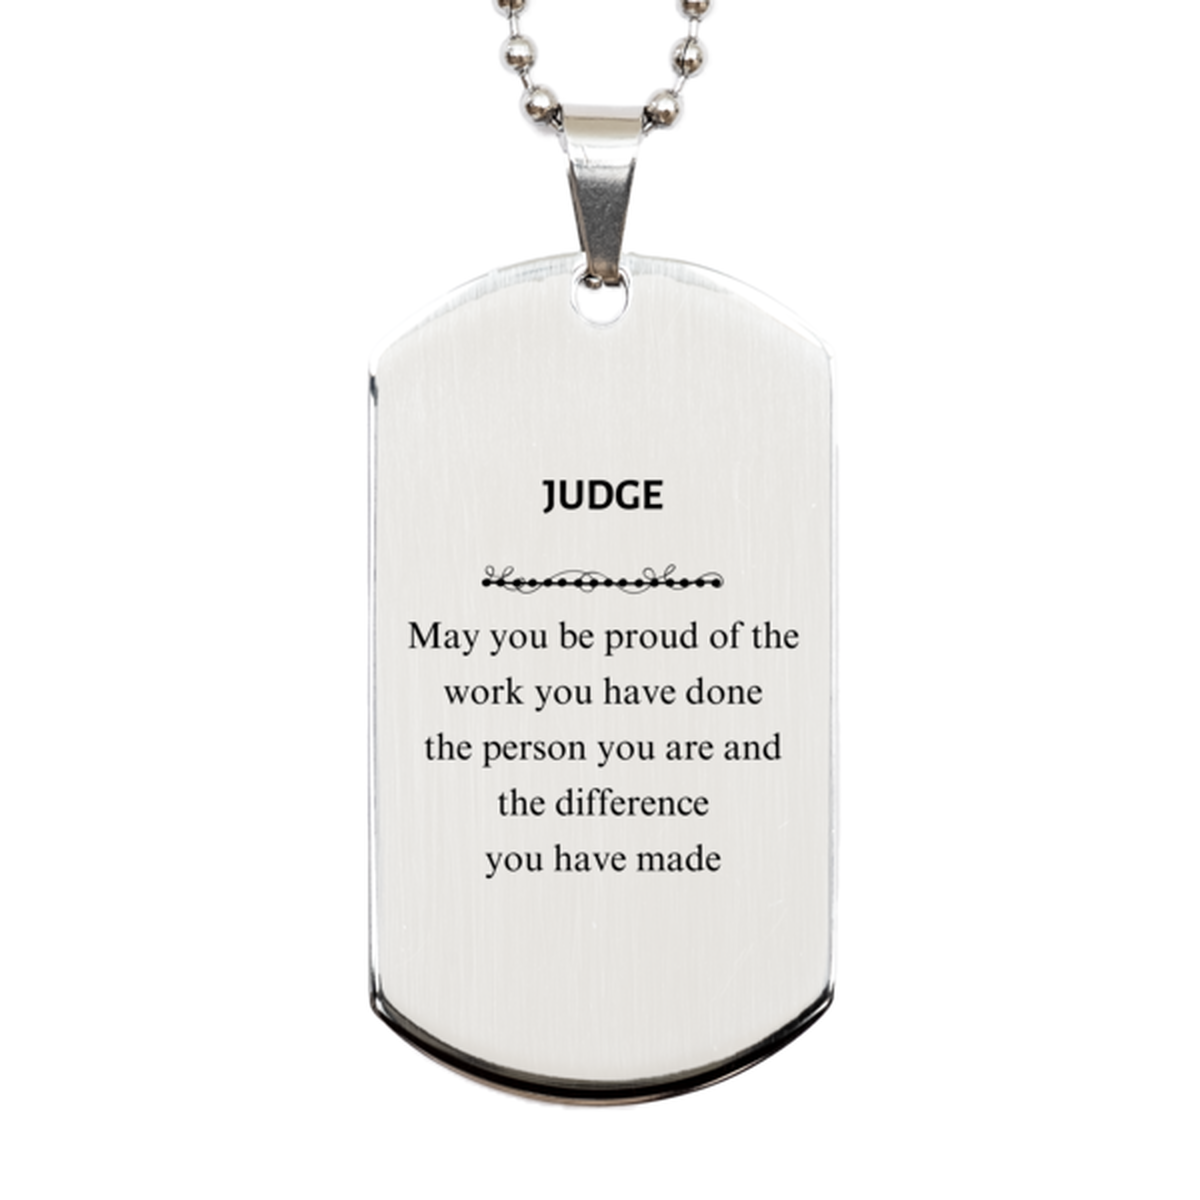 Judge May you be proud of the work you have done, Retirement Judge Silver Dog Tag for Colleague Appreciation Gifts Amazing for Judge